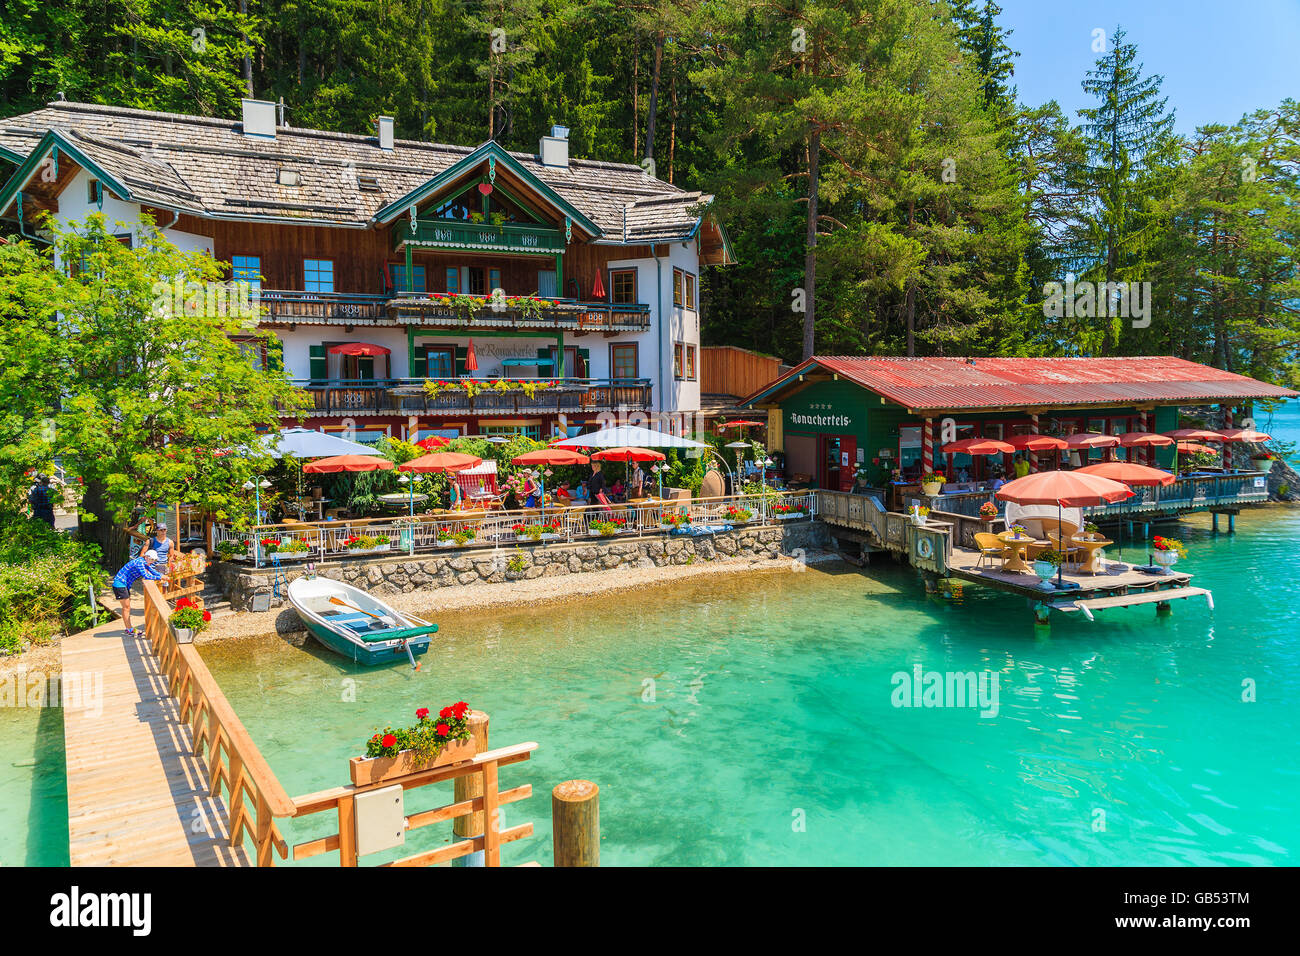 WEISSENSEE LAKE, AUSTRIA - JUL 7, 2015: restaurant and guest house on shore of Weissensee lake in summer time. Weissensee has dr Stock Photo